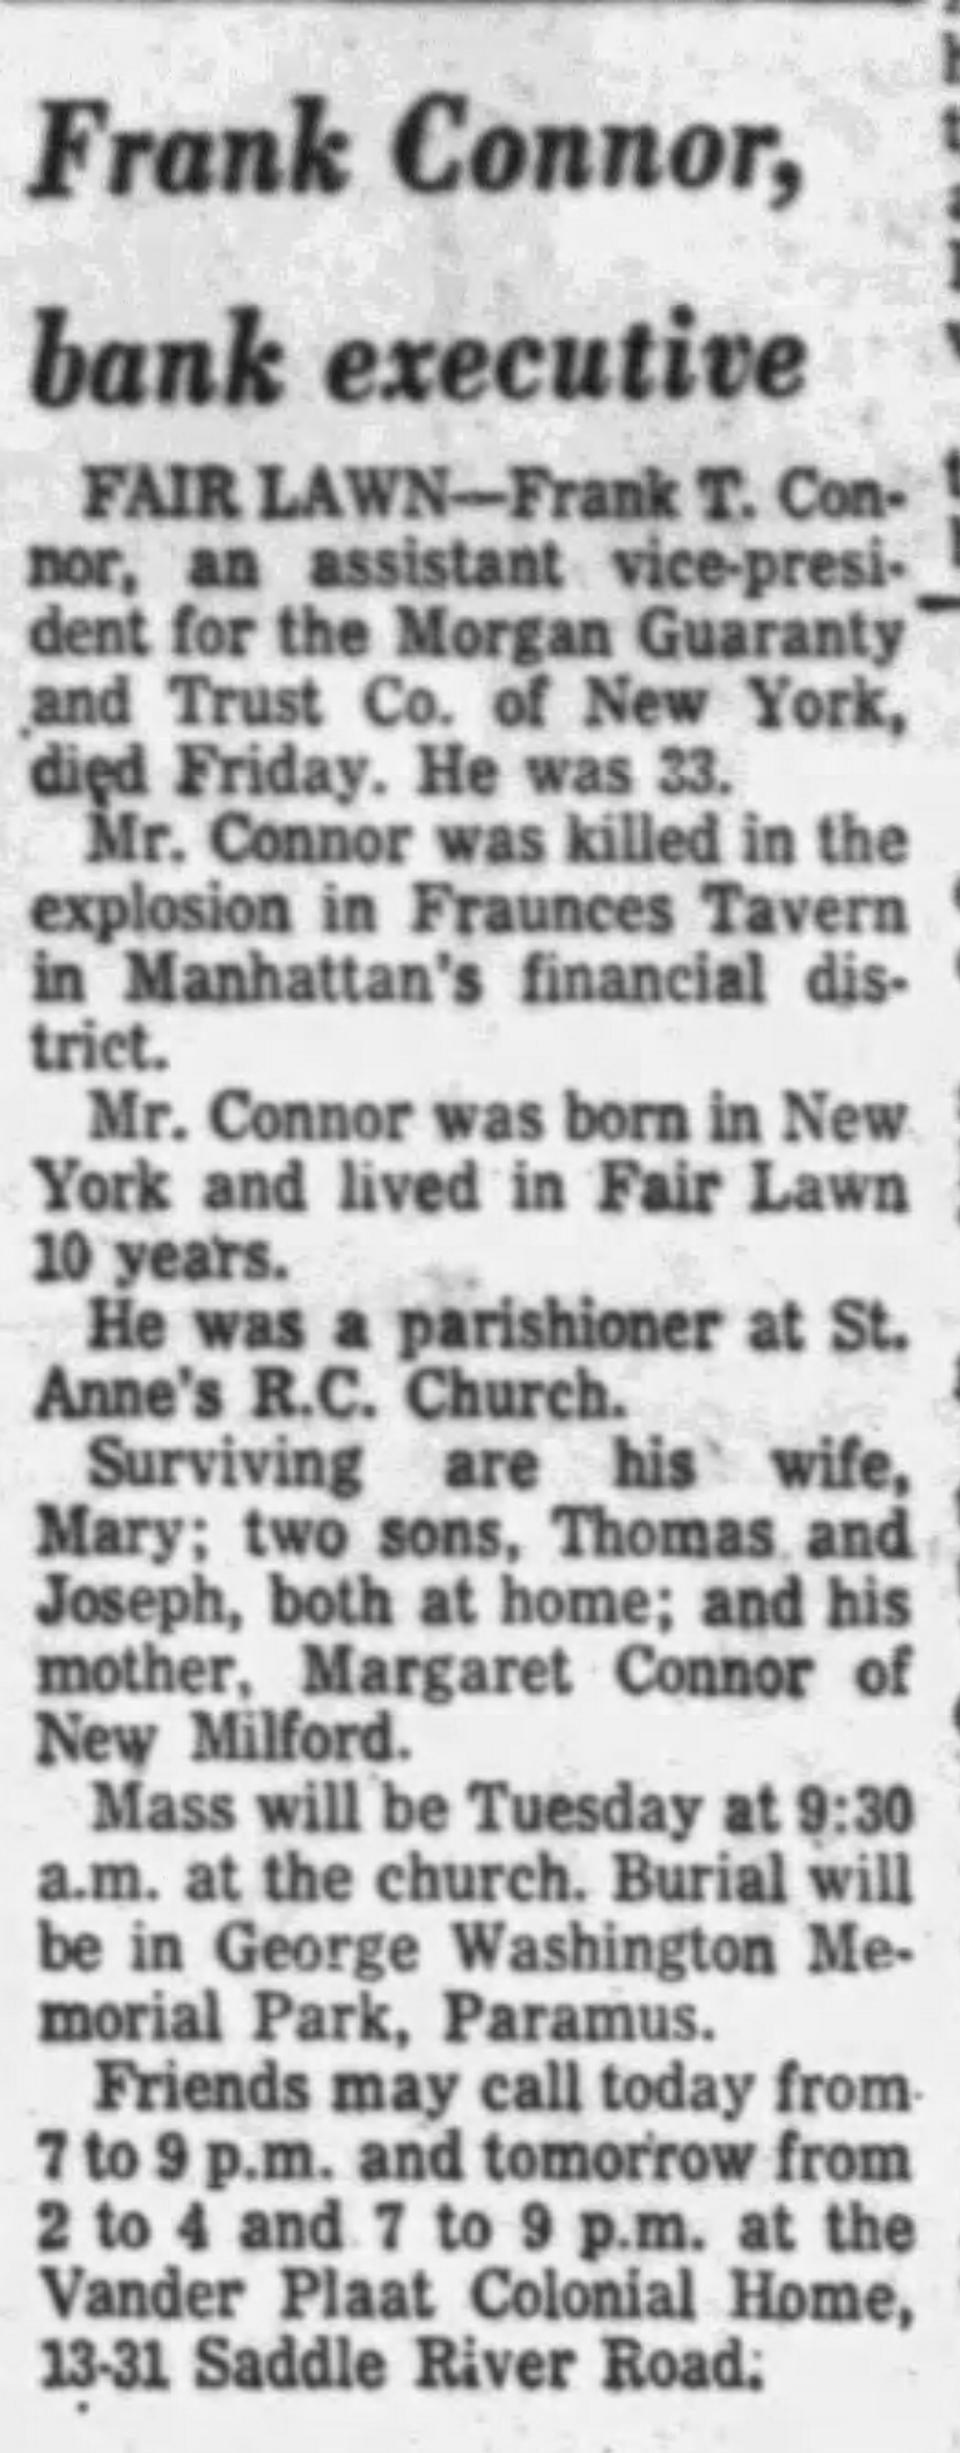 This obituary for Frank T. Connor, a Fair Lawn resident killed in a bombing at Fraunces Tavern in lower Manhattan on Jan. 24, 1975, was published in the Jan. 26, 1975 editions of The Sunday Record.